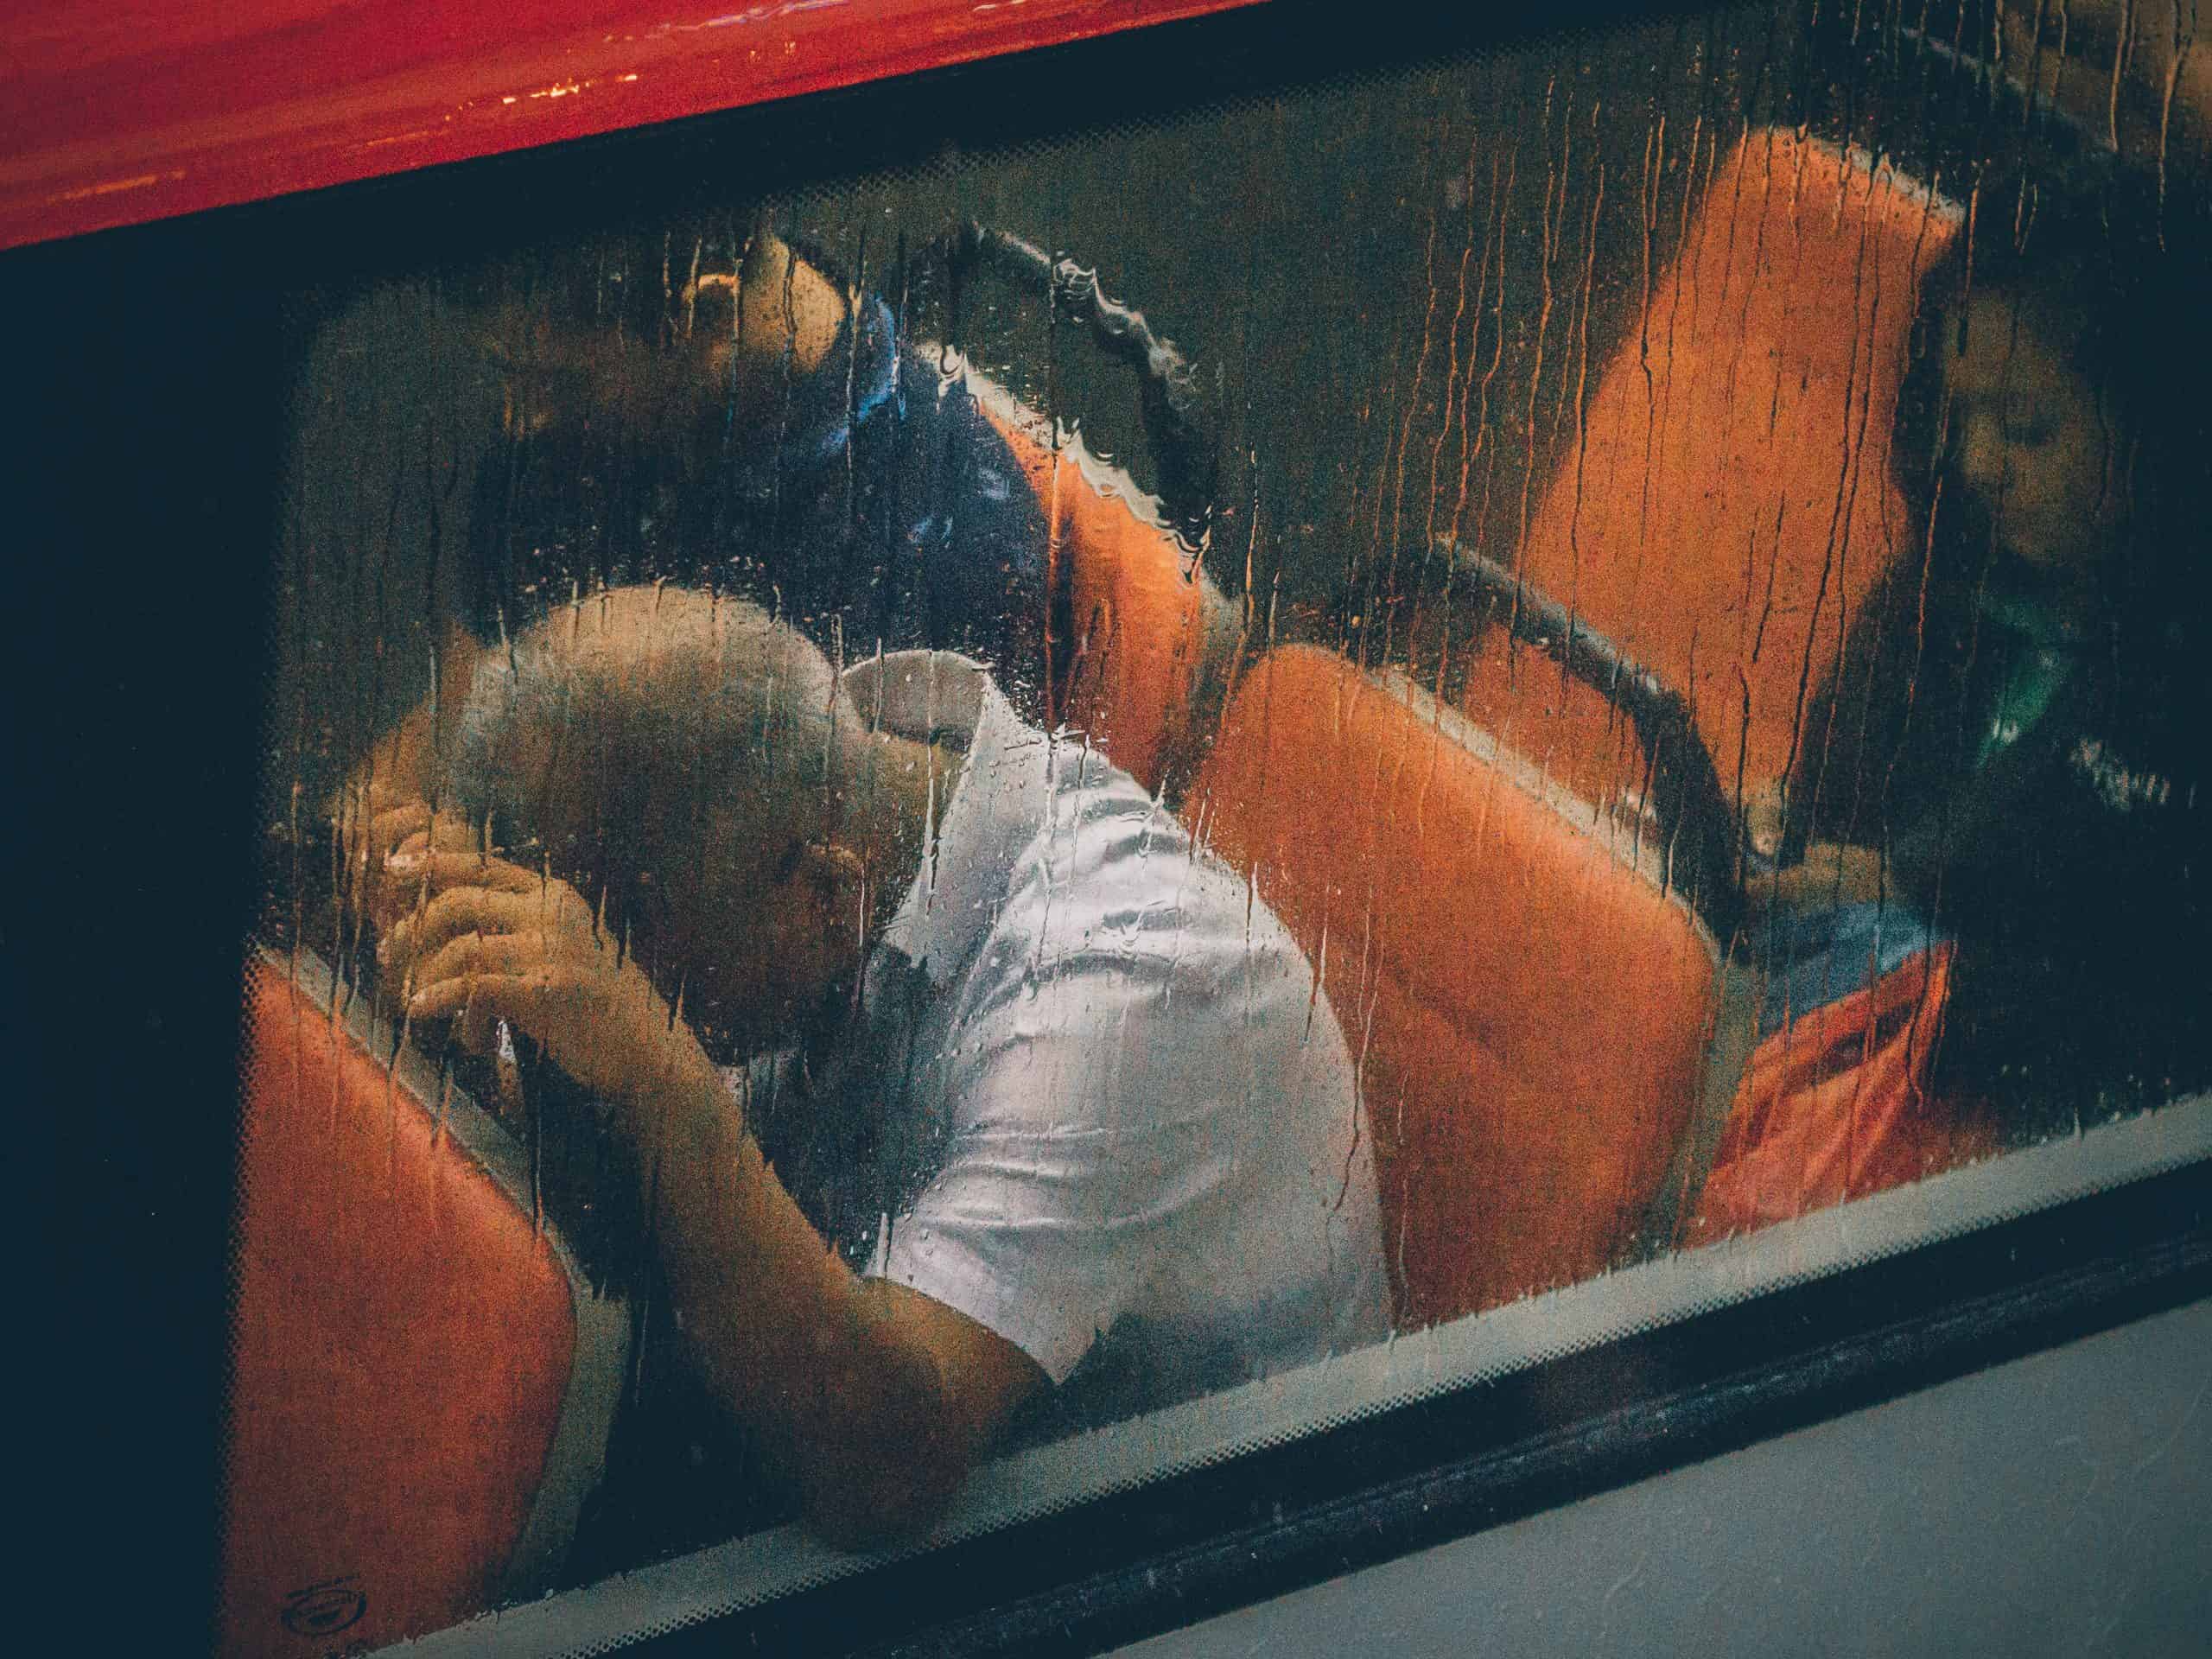  man on bus looking anxious on his way to work